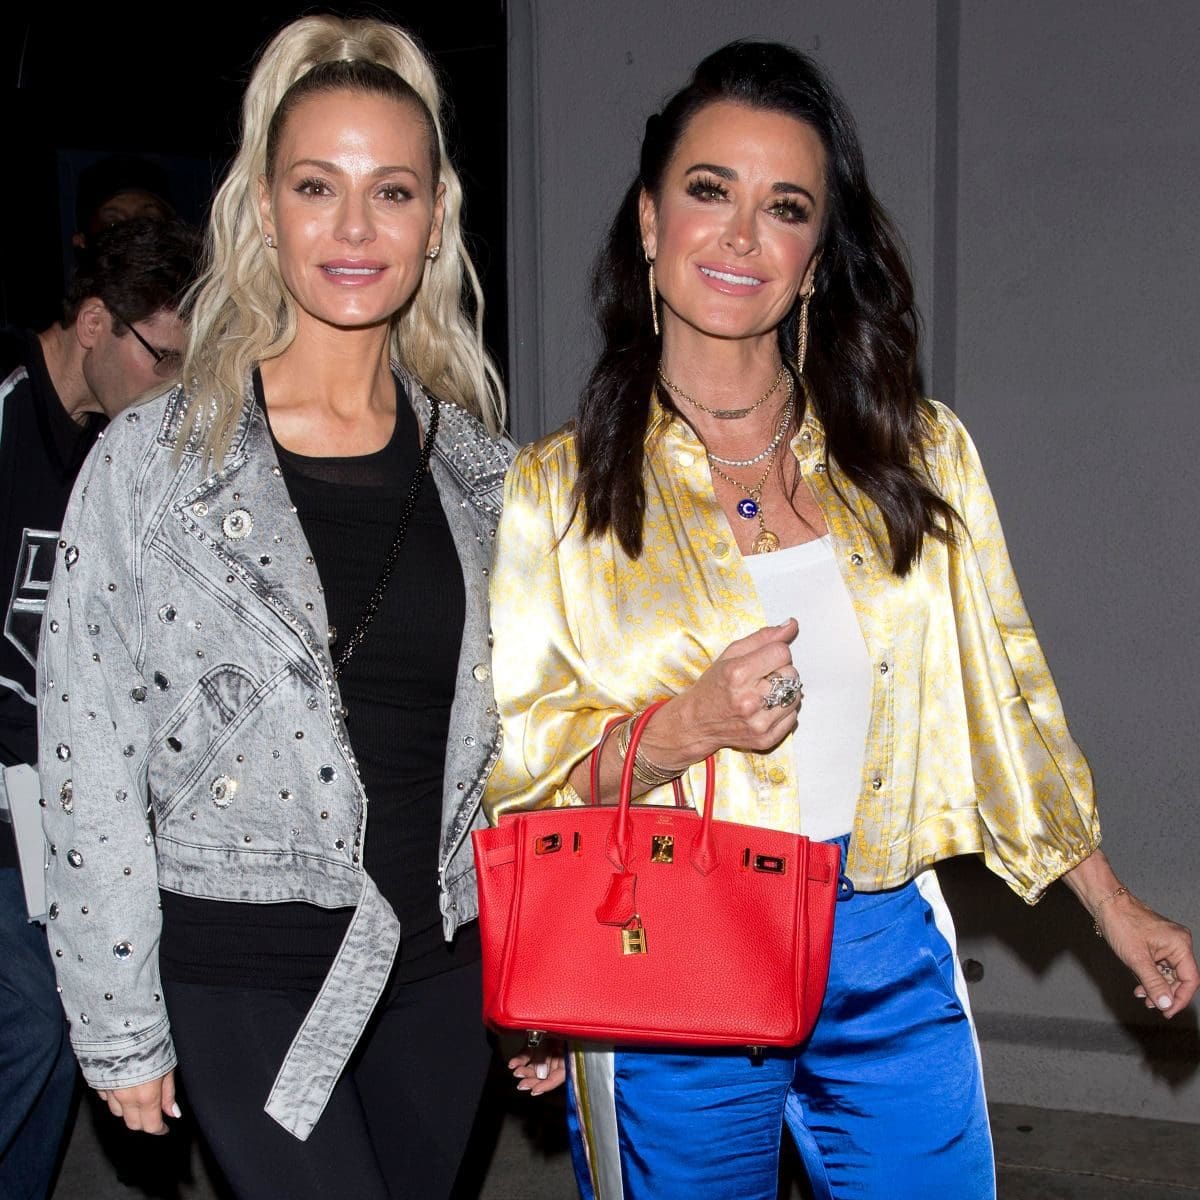 Kyle Richards and Dorit Kemsley were reportedly standoffish at BravoCon